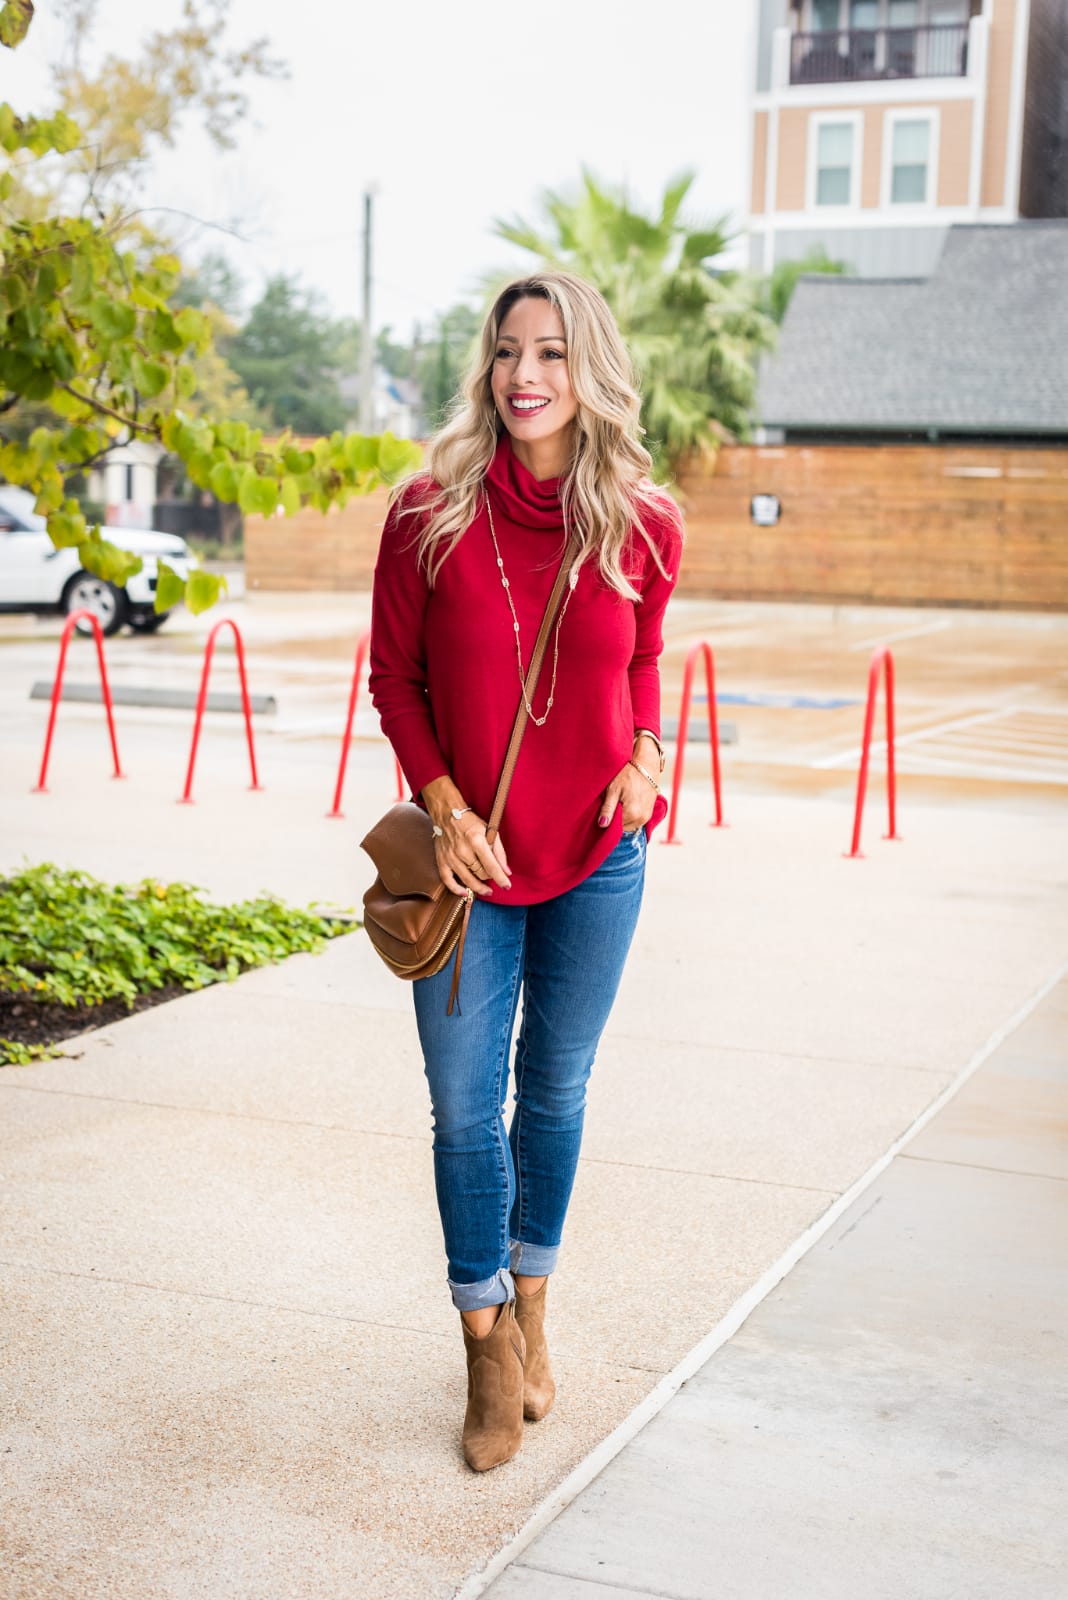 Winter outfit - red sweater jeans and brown booties